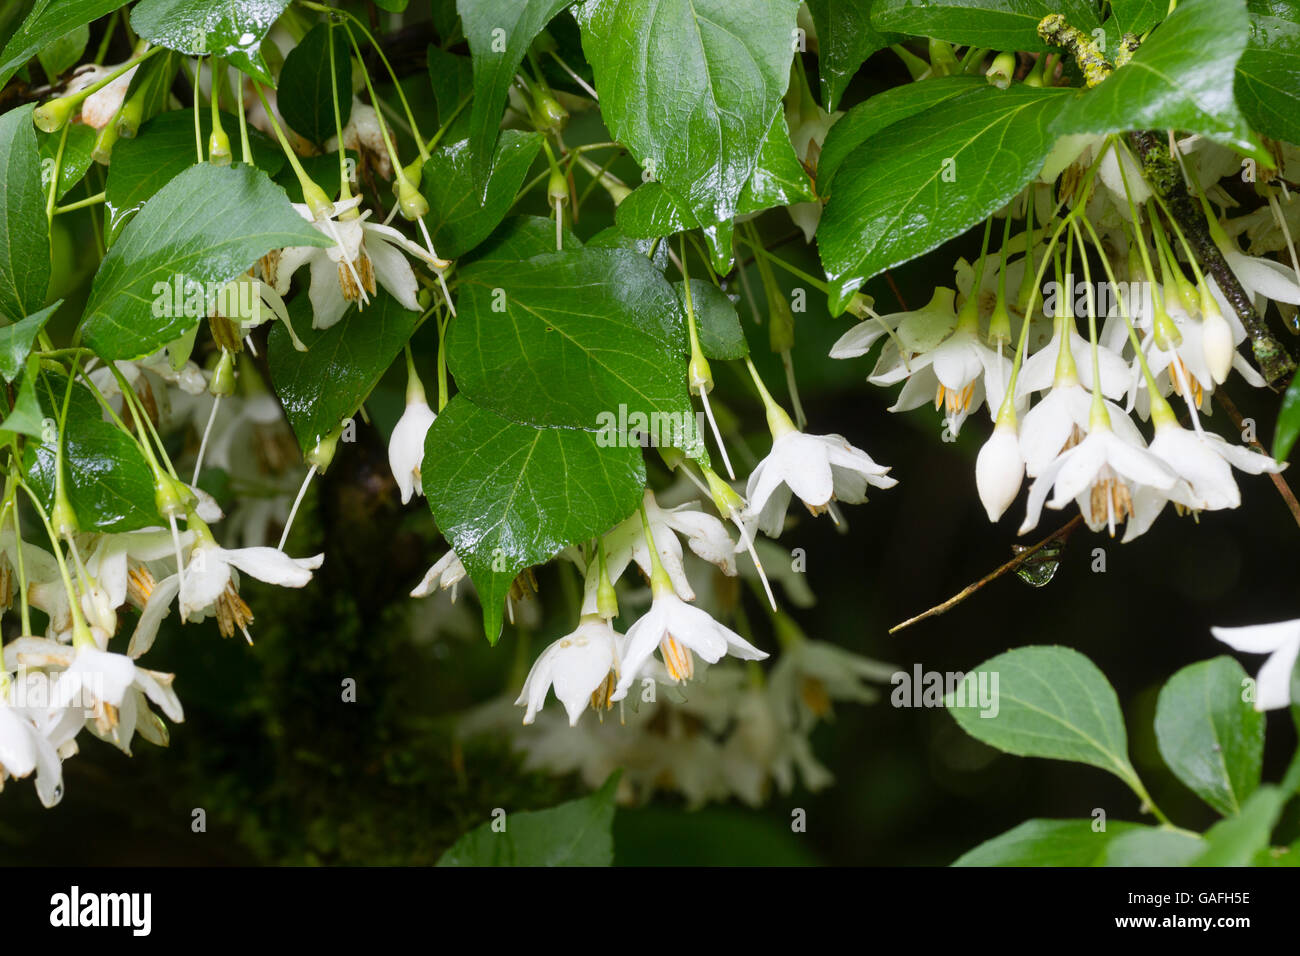 Flowers of the Japanese, mid summer flowering small tree, Styrax japonica Stock Photo